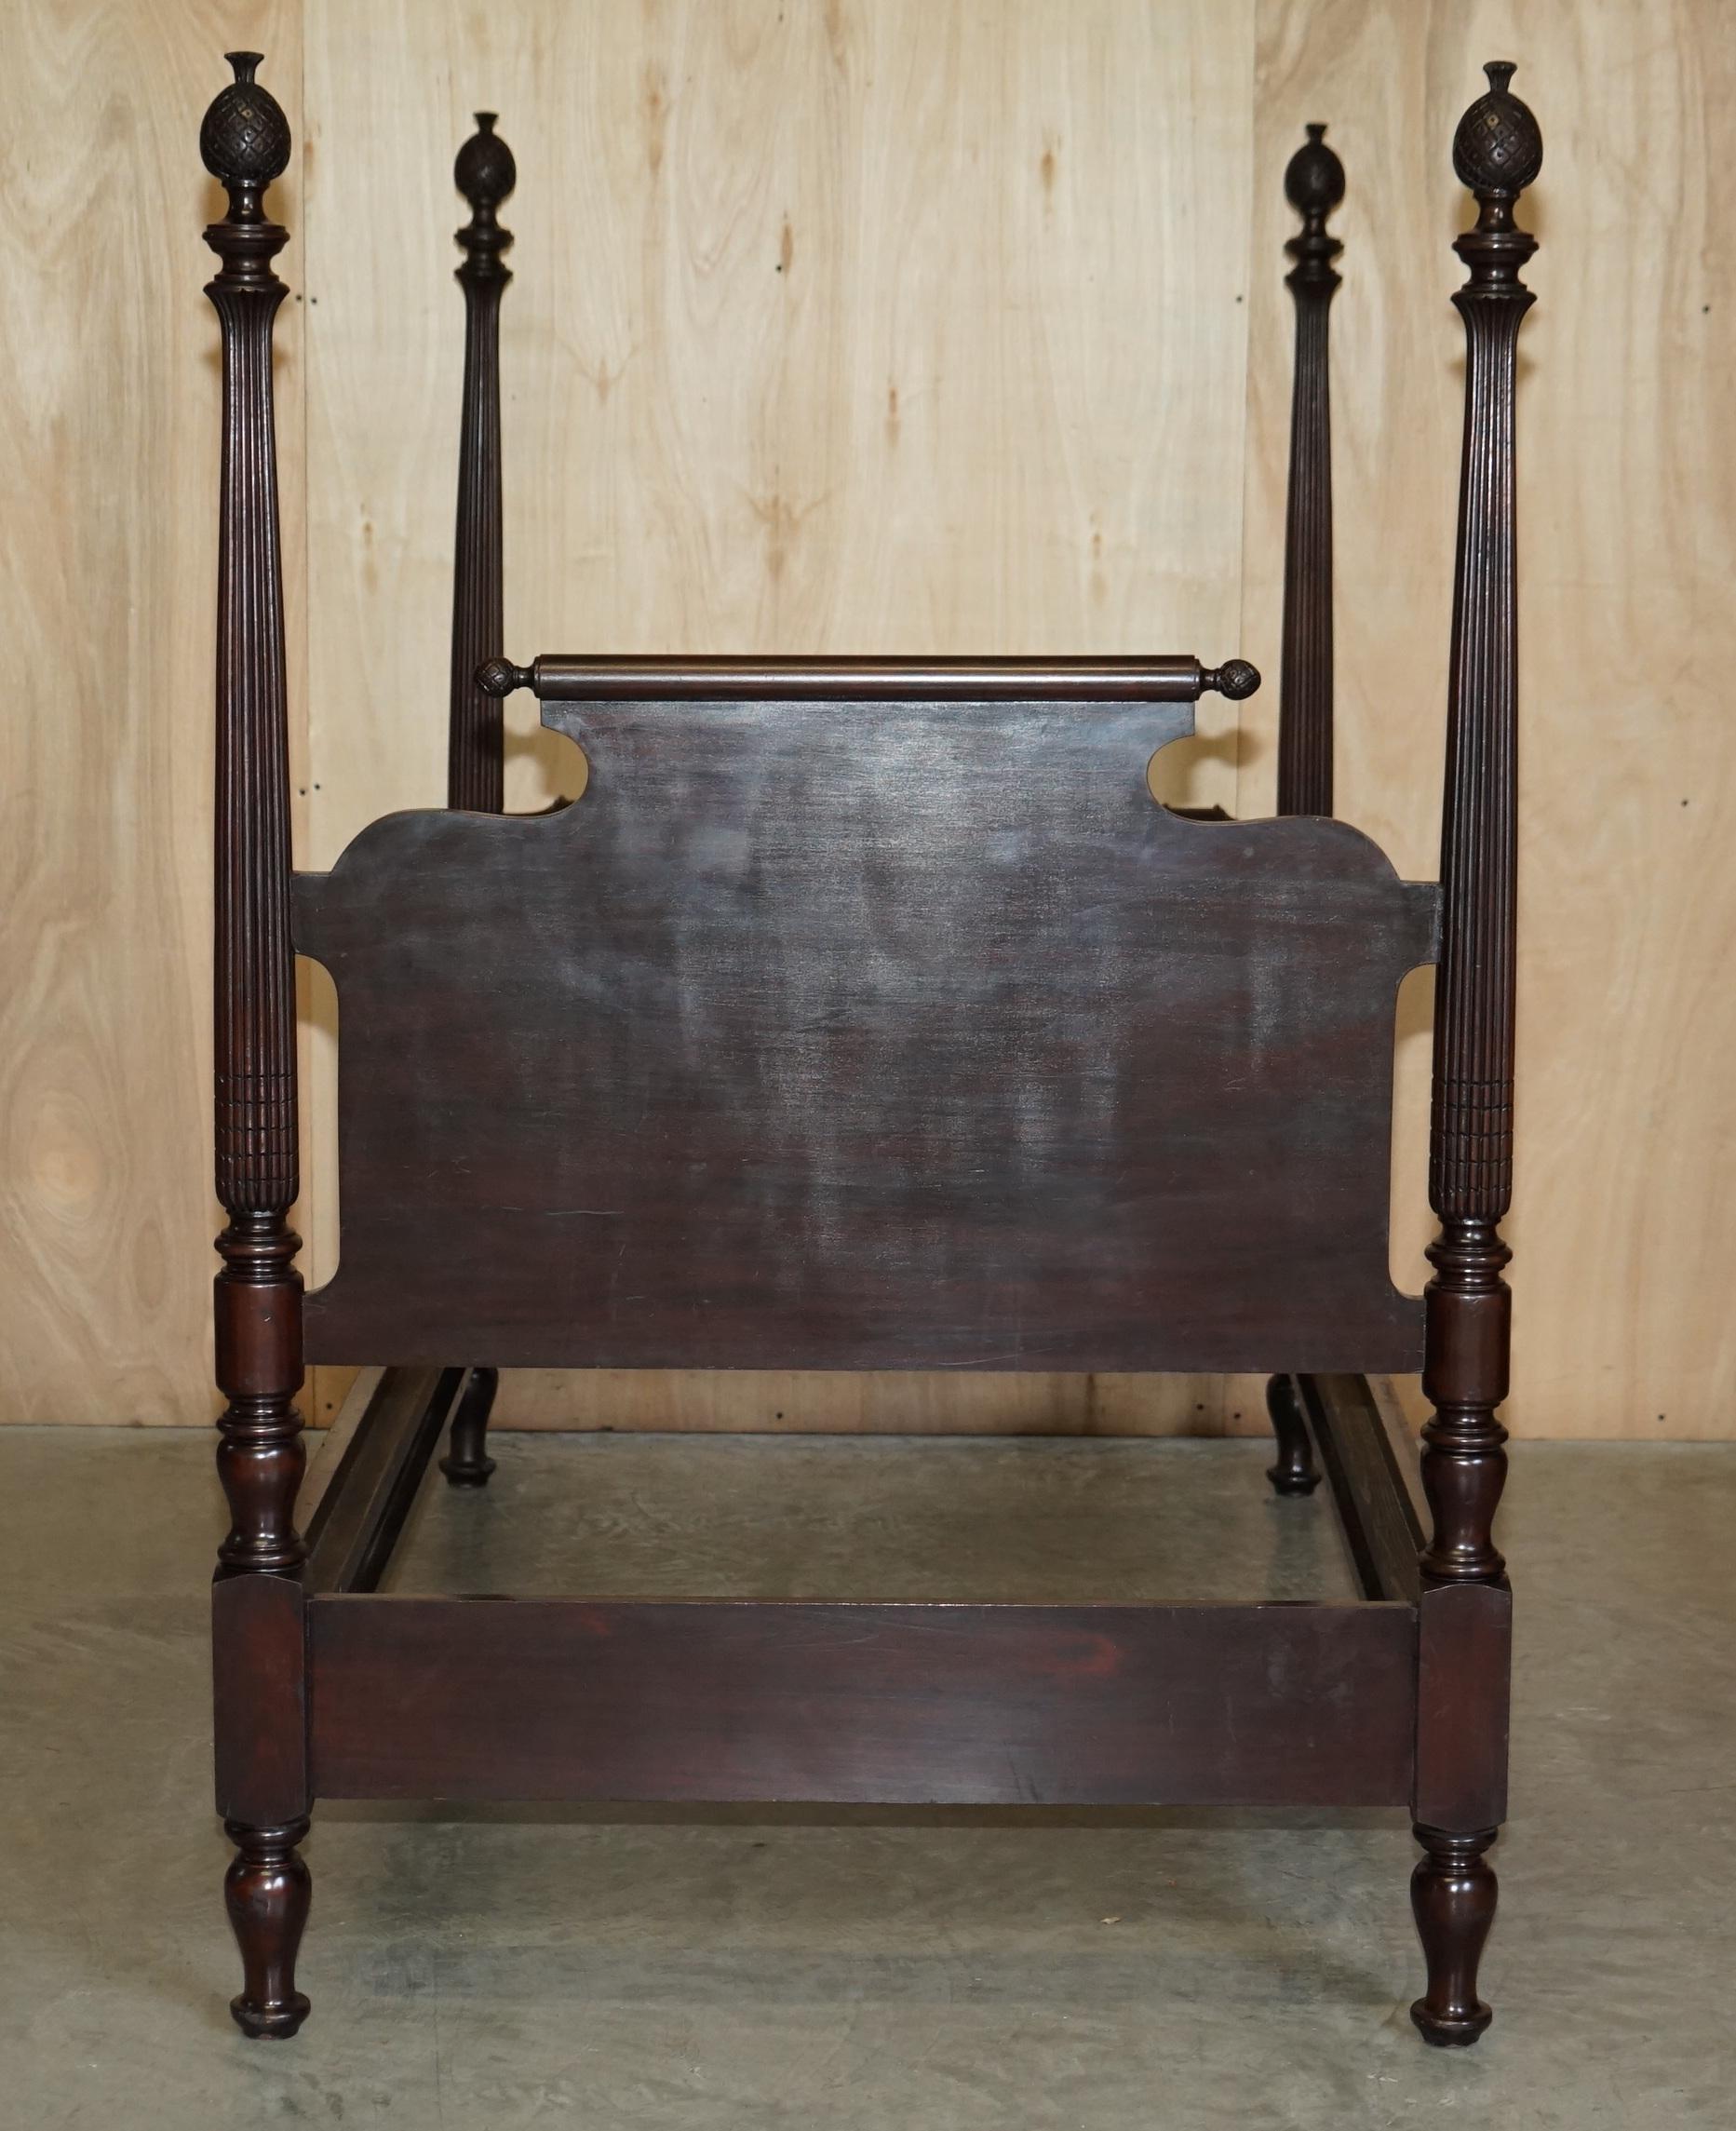 Circa 1800 American Federal Hardwood Four Poster Bed Frame with Carved Pillars For Sale 12